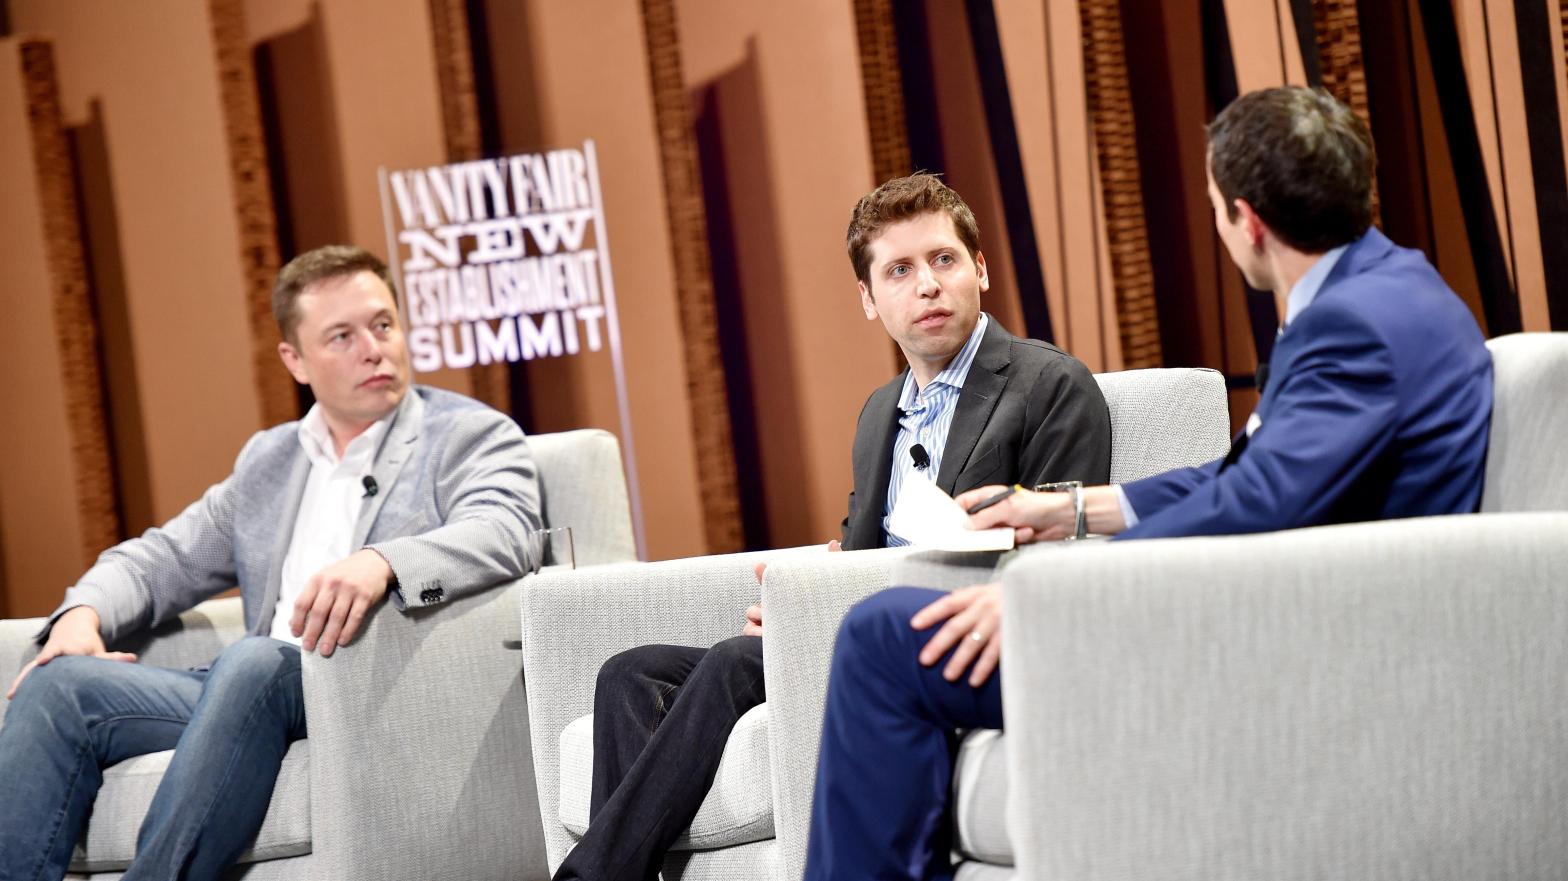 Elon Musk, left, and Sam Altman, middle, were once co-chairs for OpenAI, though Musk left in 2018. Though the company said it was due to conflicts of interest, a new report claims that it was much more personal. (Photo: Mike Windle, Getty Images)